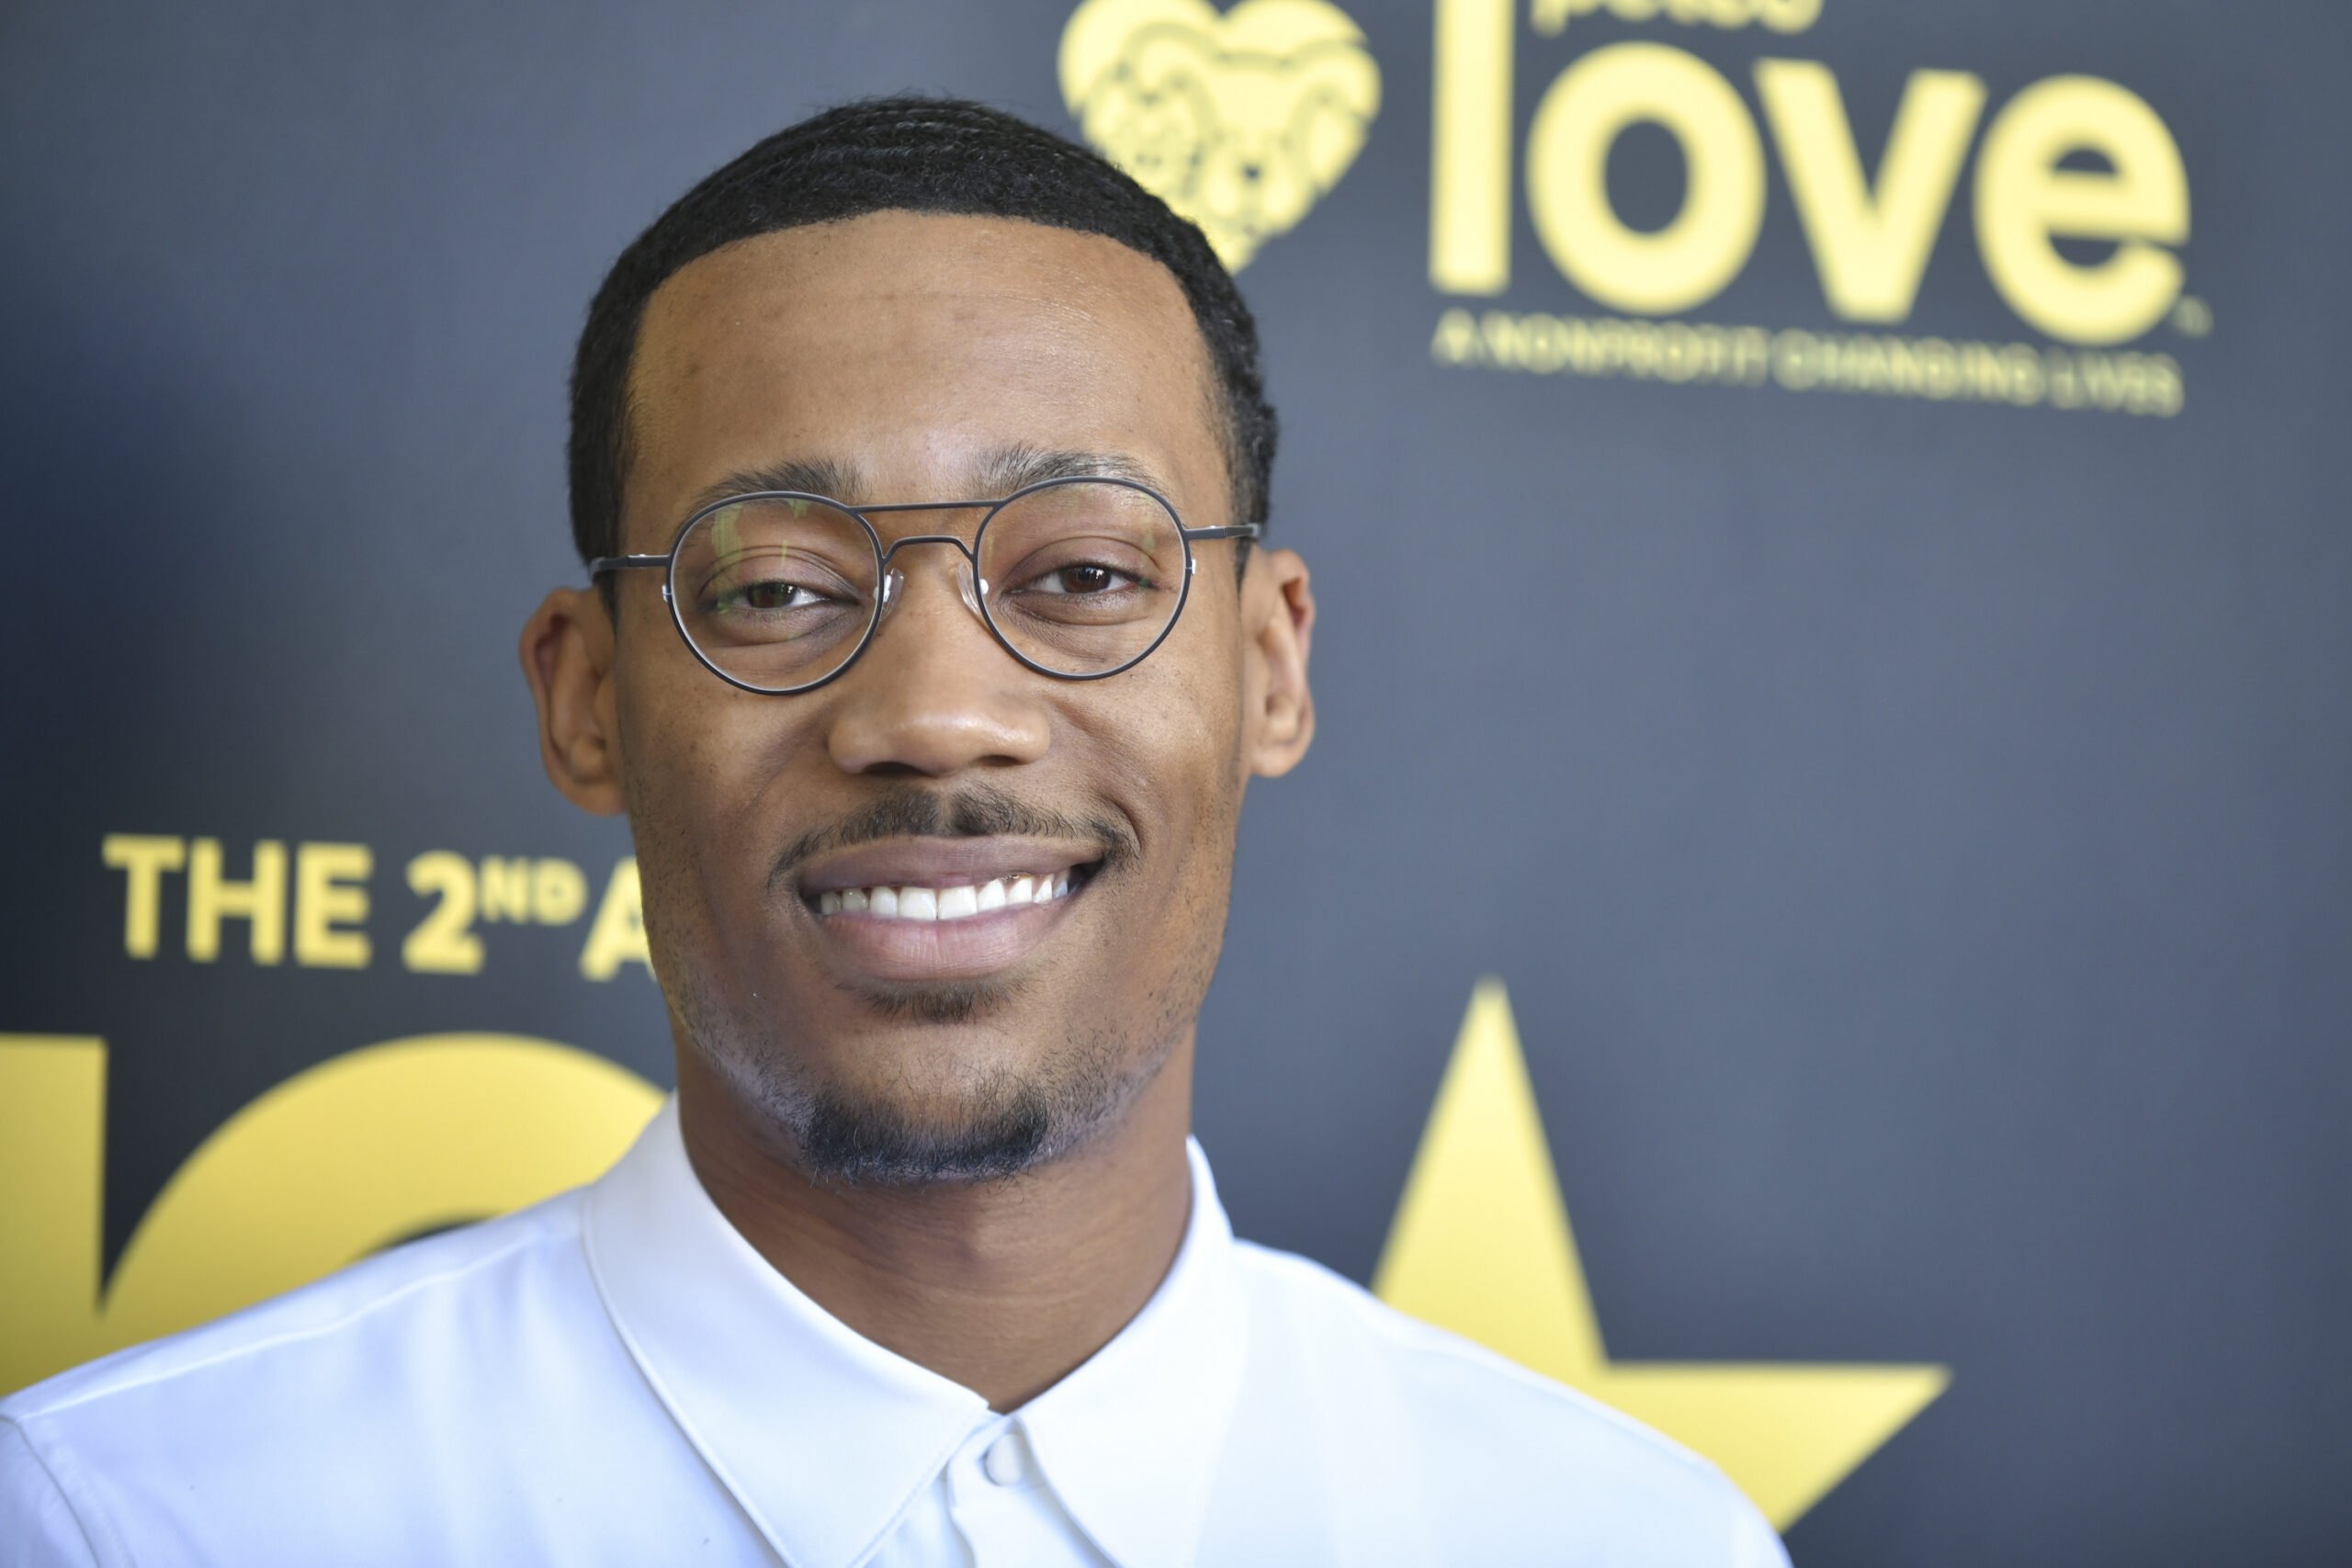 'Everybody Hates Chris' Star Tyler James Williams Recalls Adjusting to Stardom Being a Challenging Process as a Teen